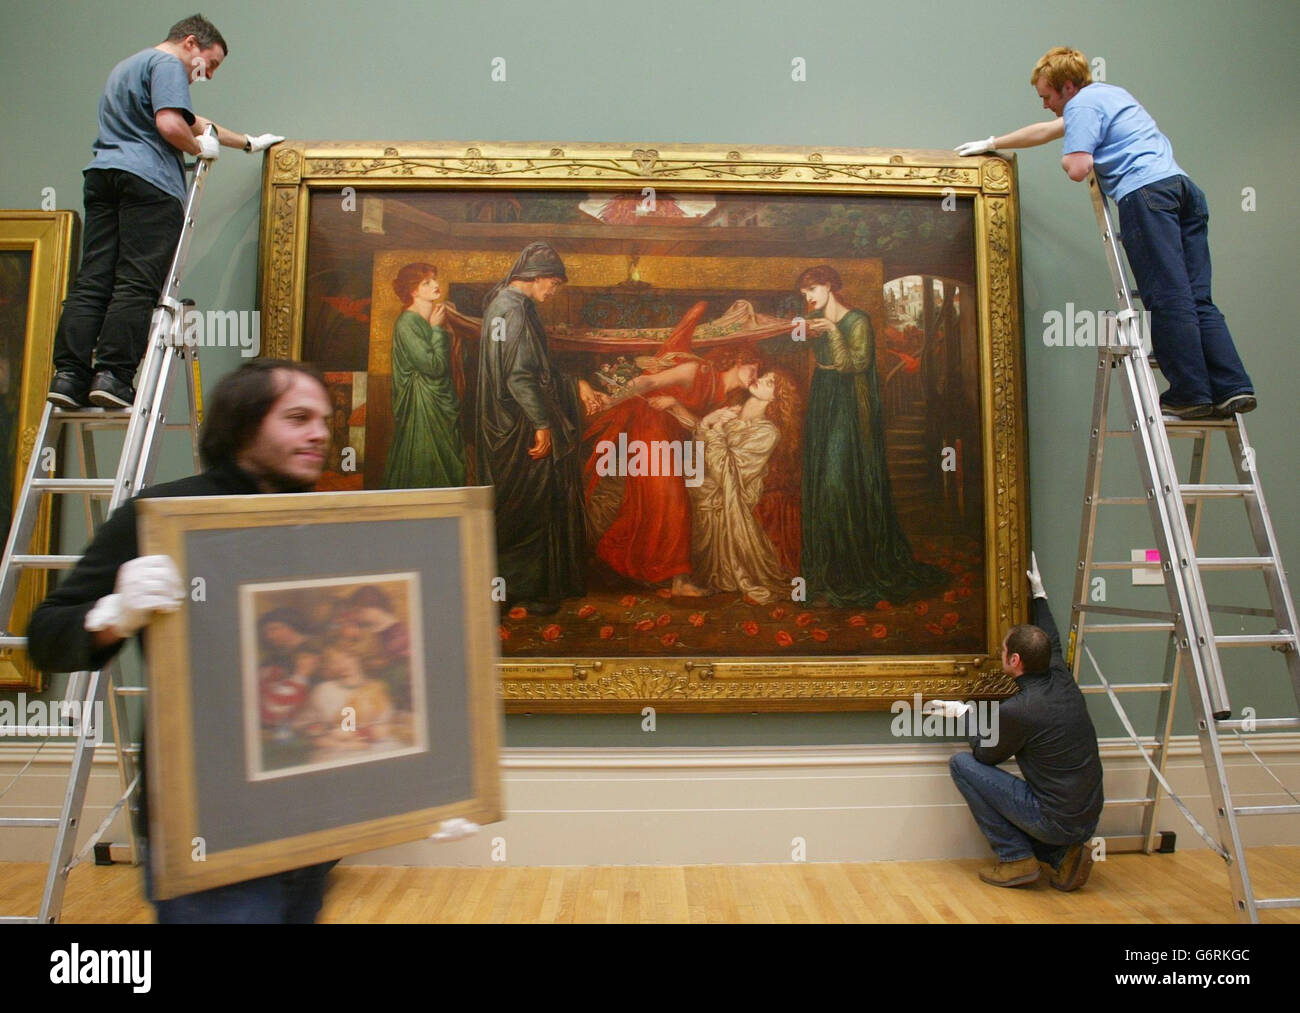 Curators at Liverpool's Walker Art Gallery dismantle the popular exhibition of the work of artist Dante Gabriel Rossetti (1828-1882). The show which includes the painting, Dante's dream, seen here being removed from the wall, is moving to the Van Gogh museum in Amsterdam, where it will go on run from Feb 27 to June 6. Stock Photo